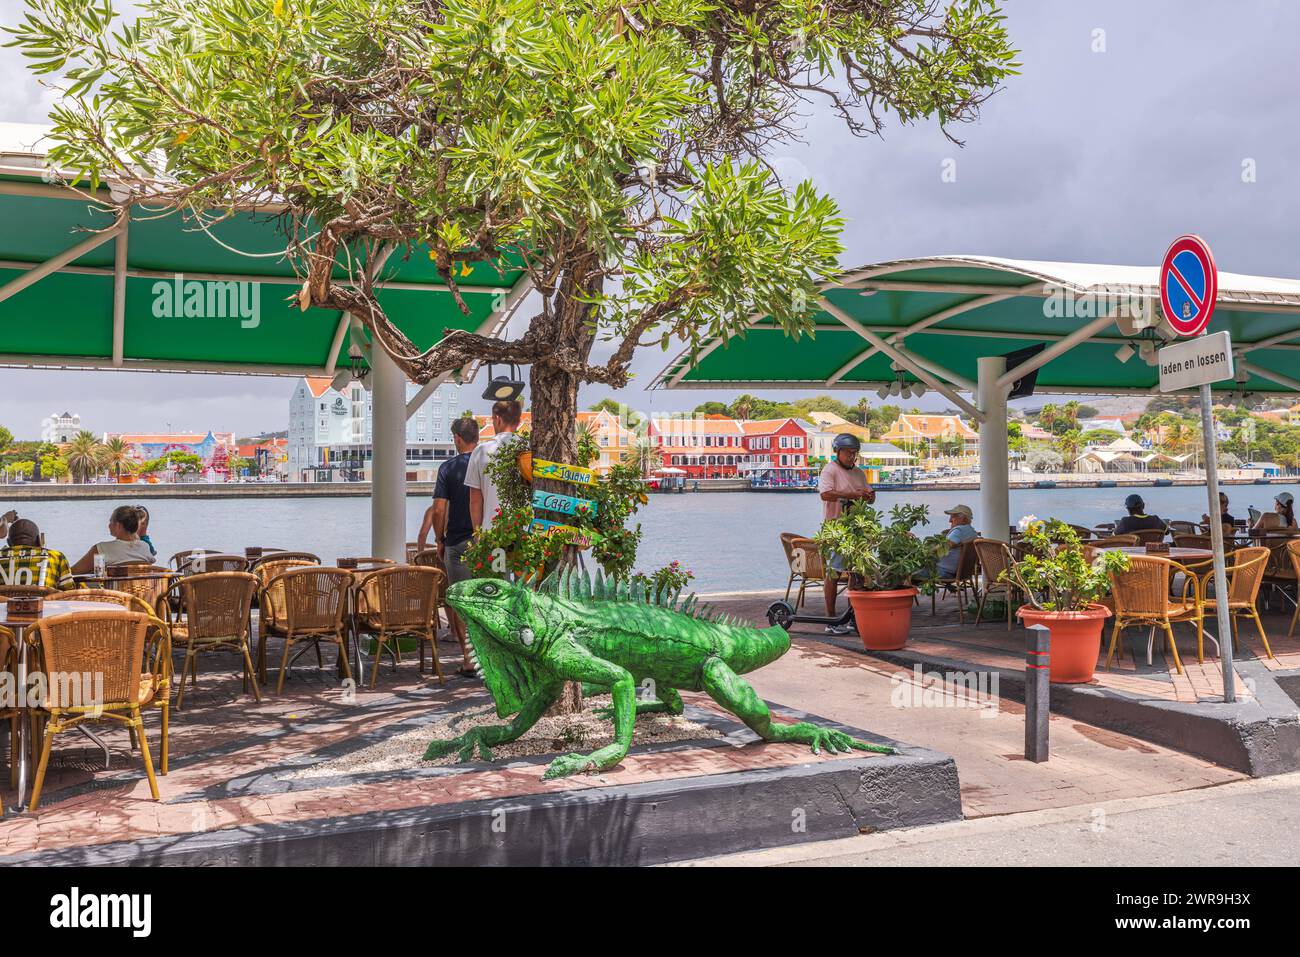 Large green iguana figure at the entrance of a coastal outdoor café on Saint Anna Bay. Curacao. Willemstad. Stock Photo